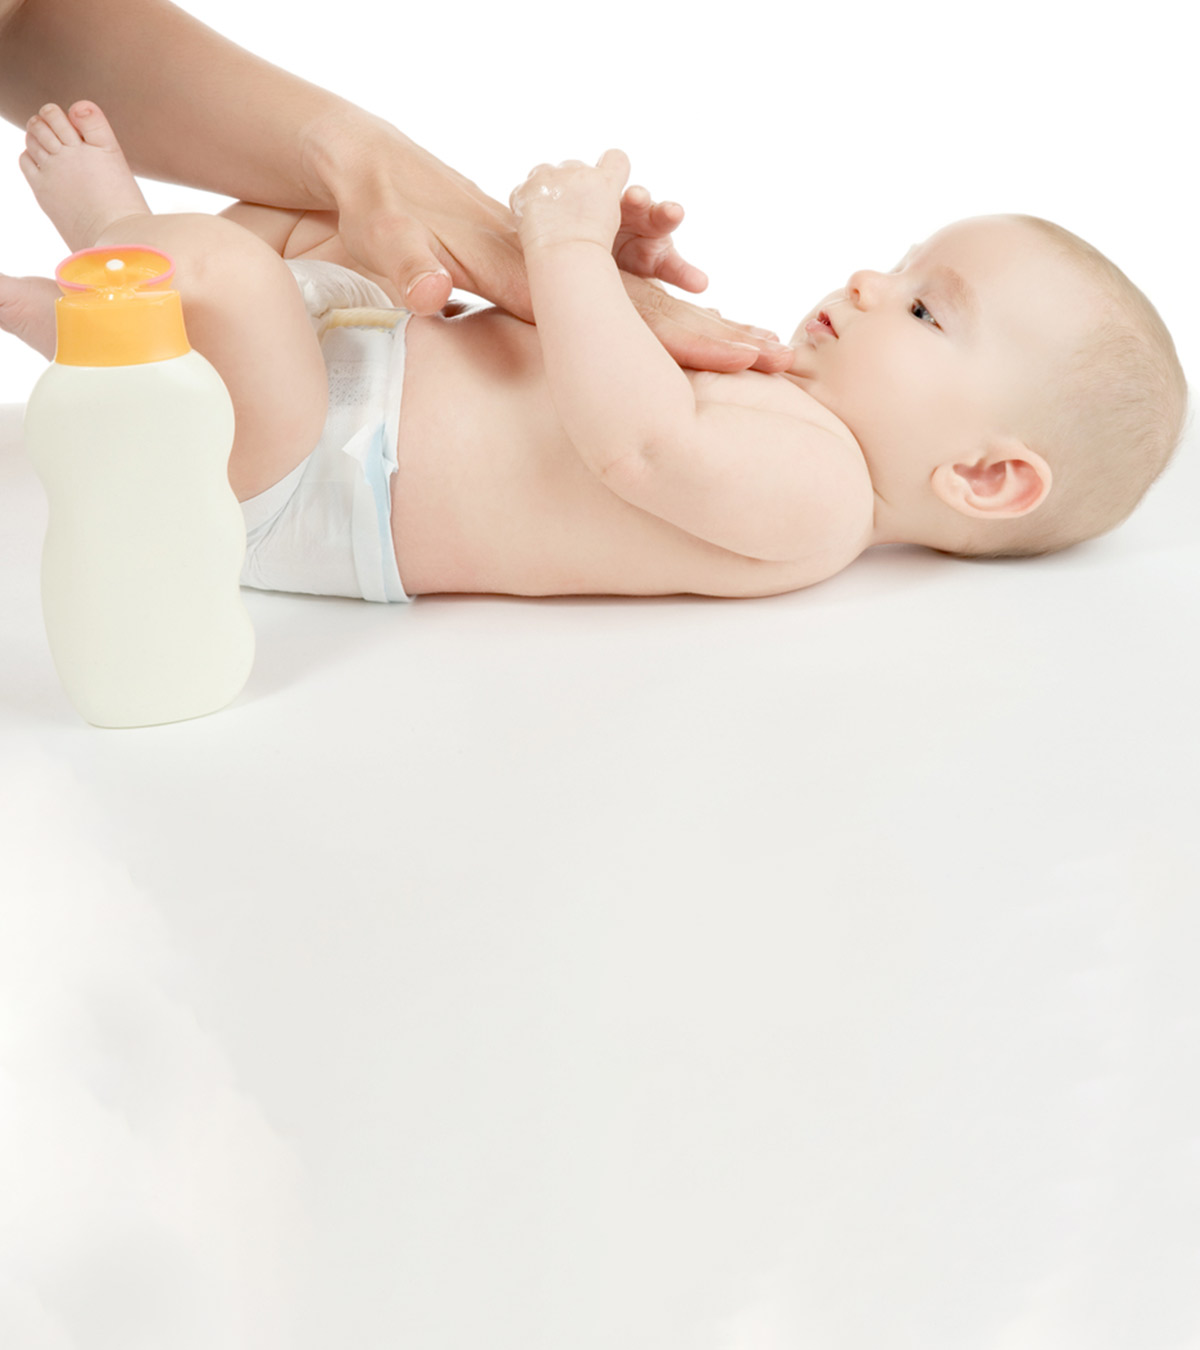 Is It Safe To Use Almond Oil For Massaging A Baby?